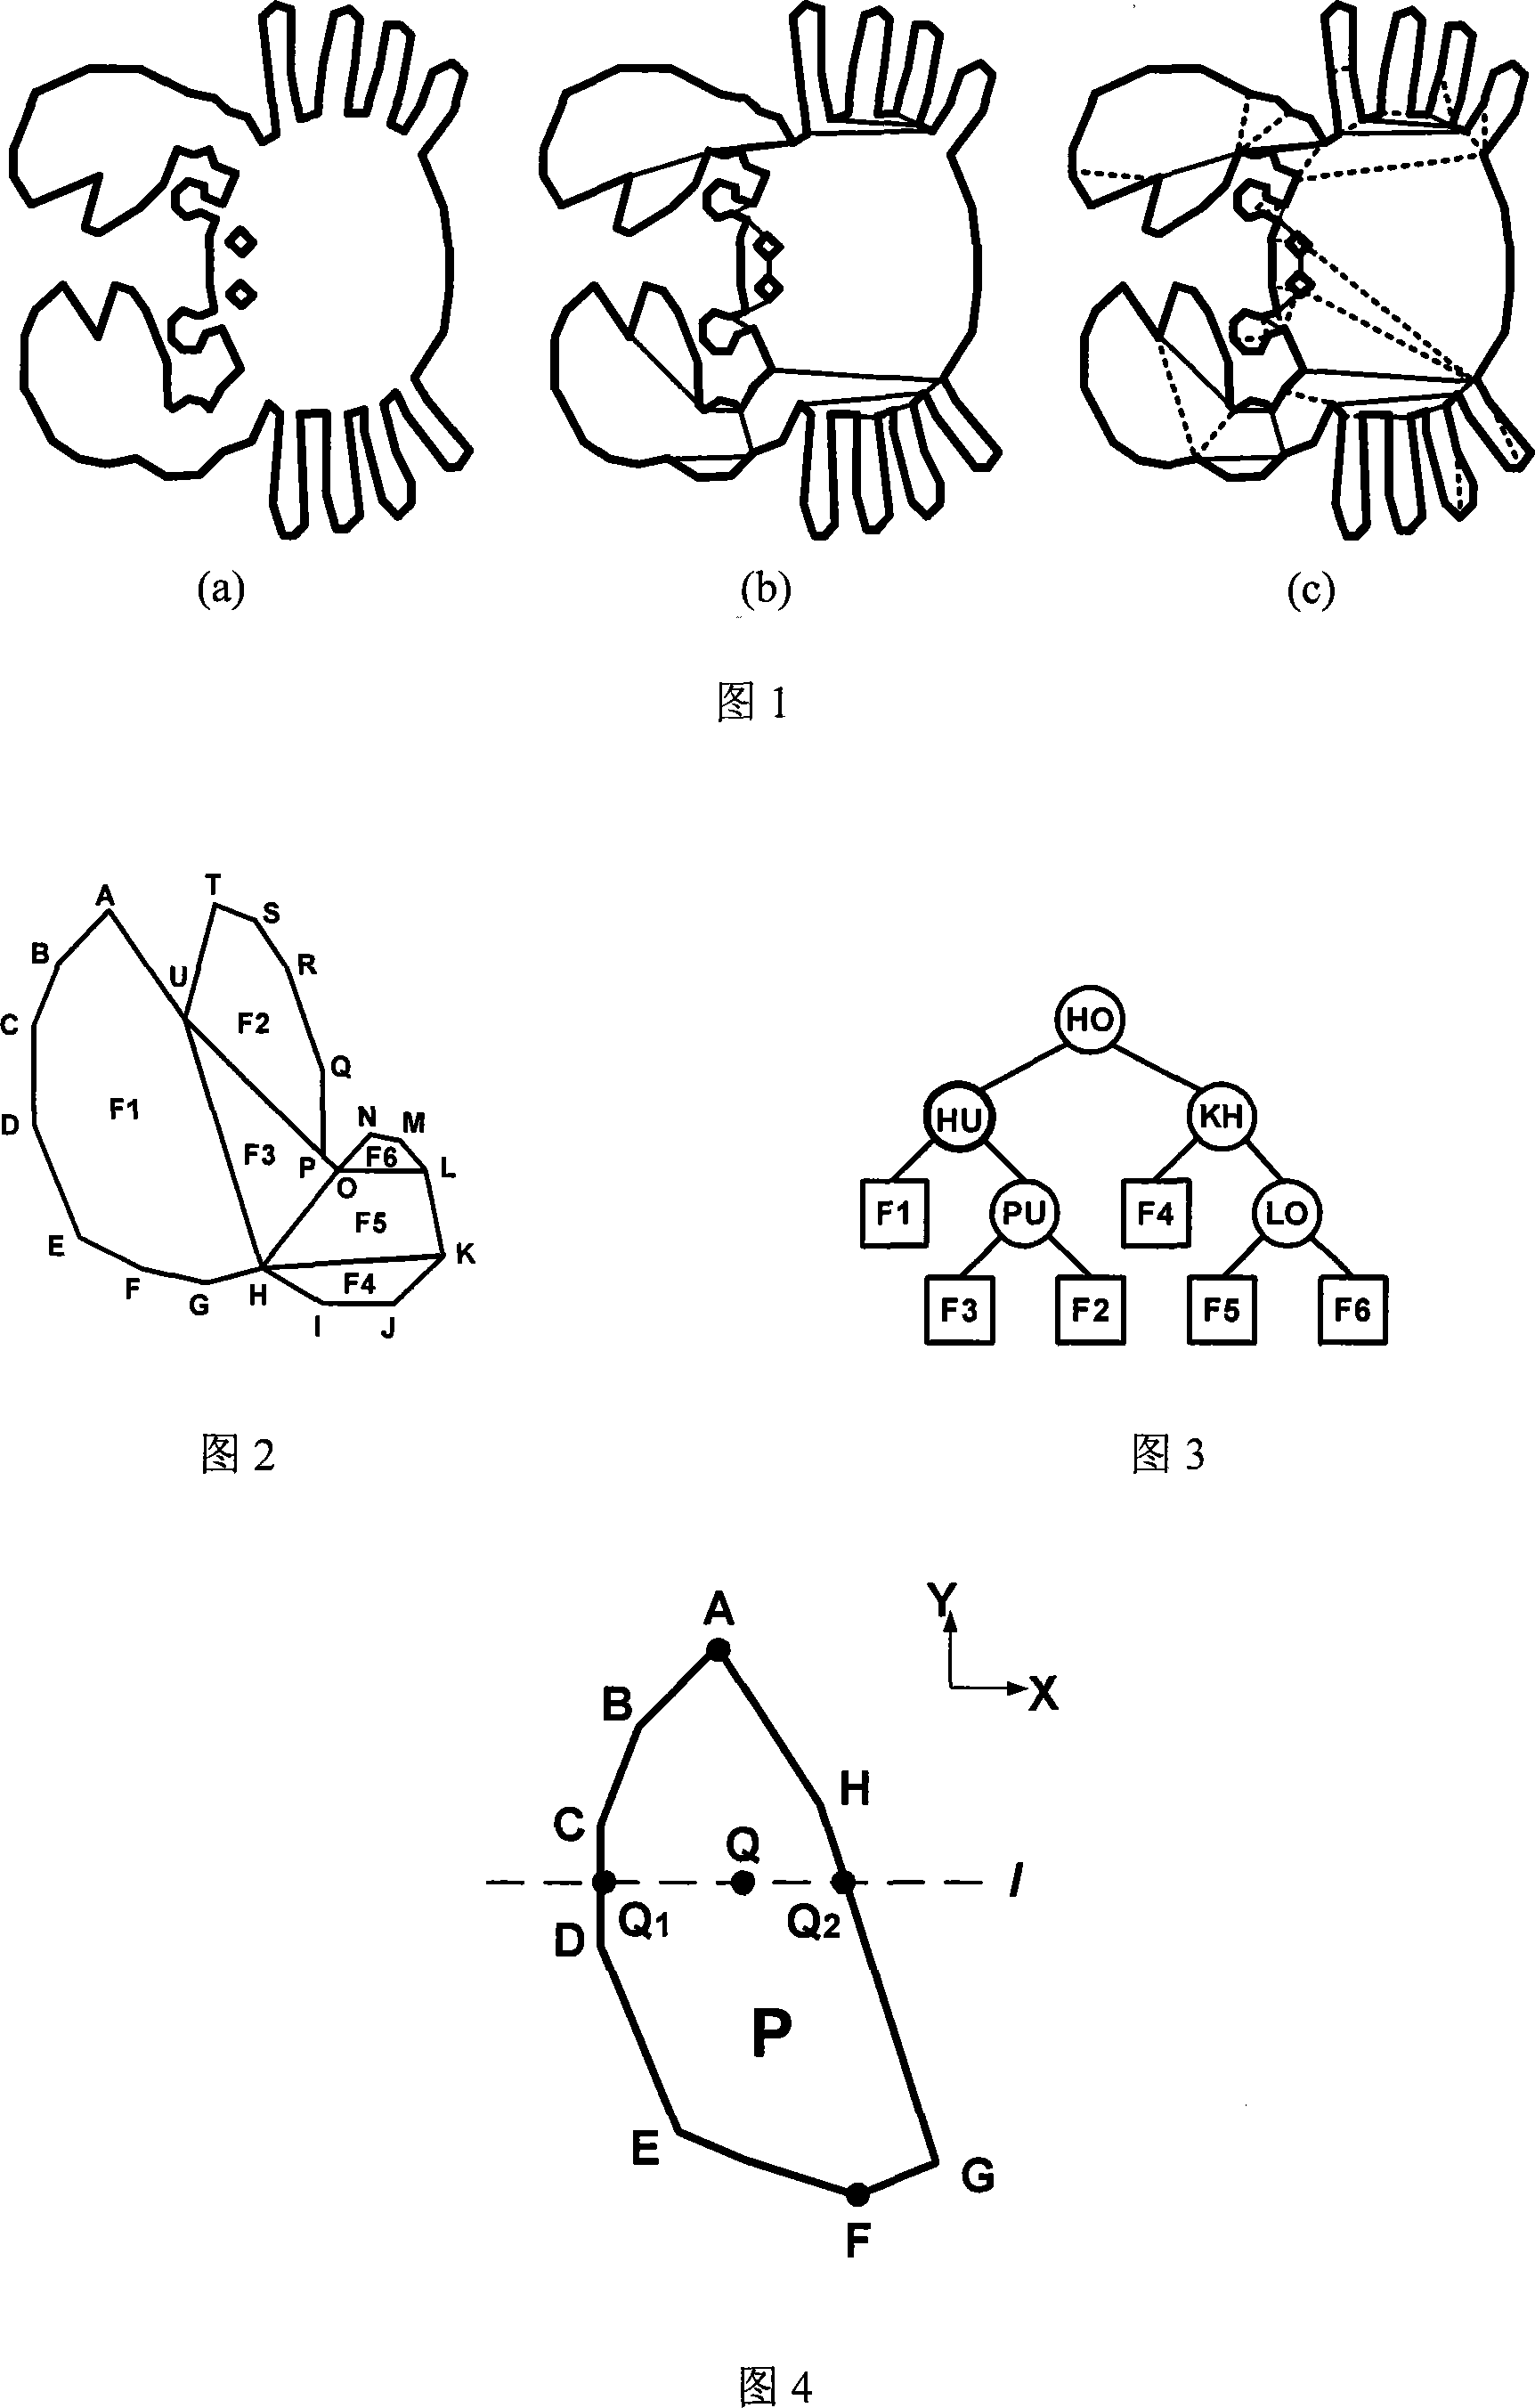 Method for judging point whether or not situated in polygon